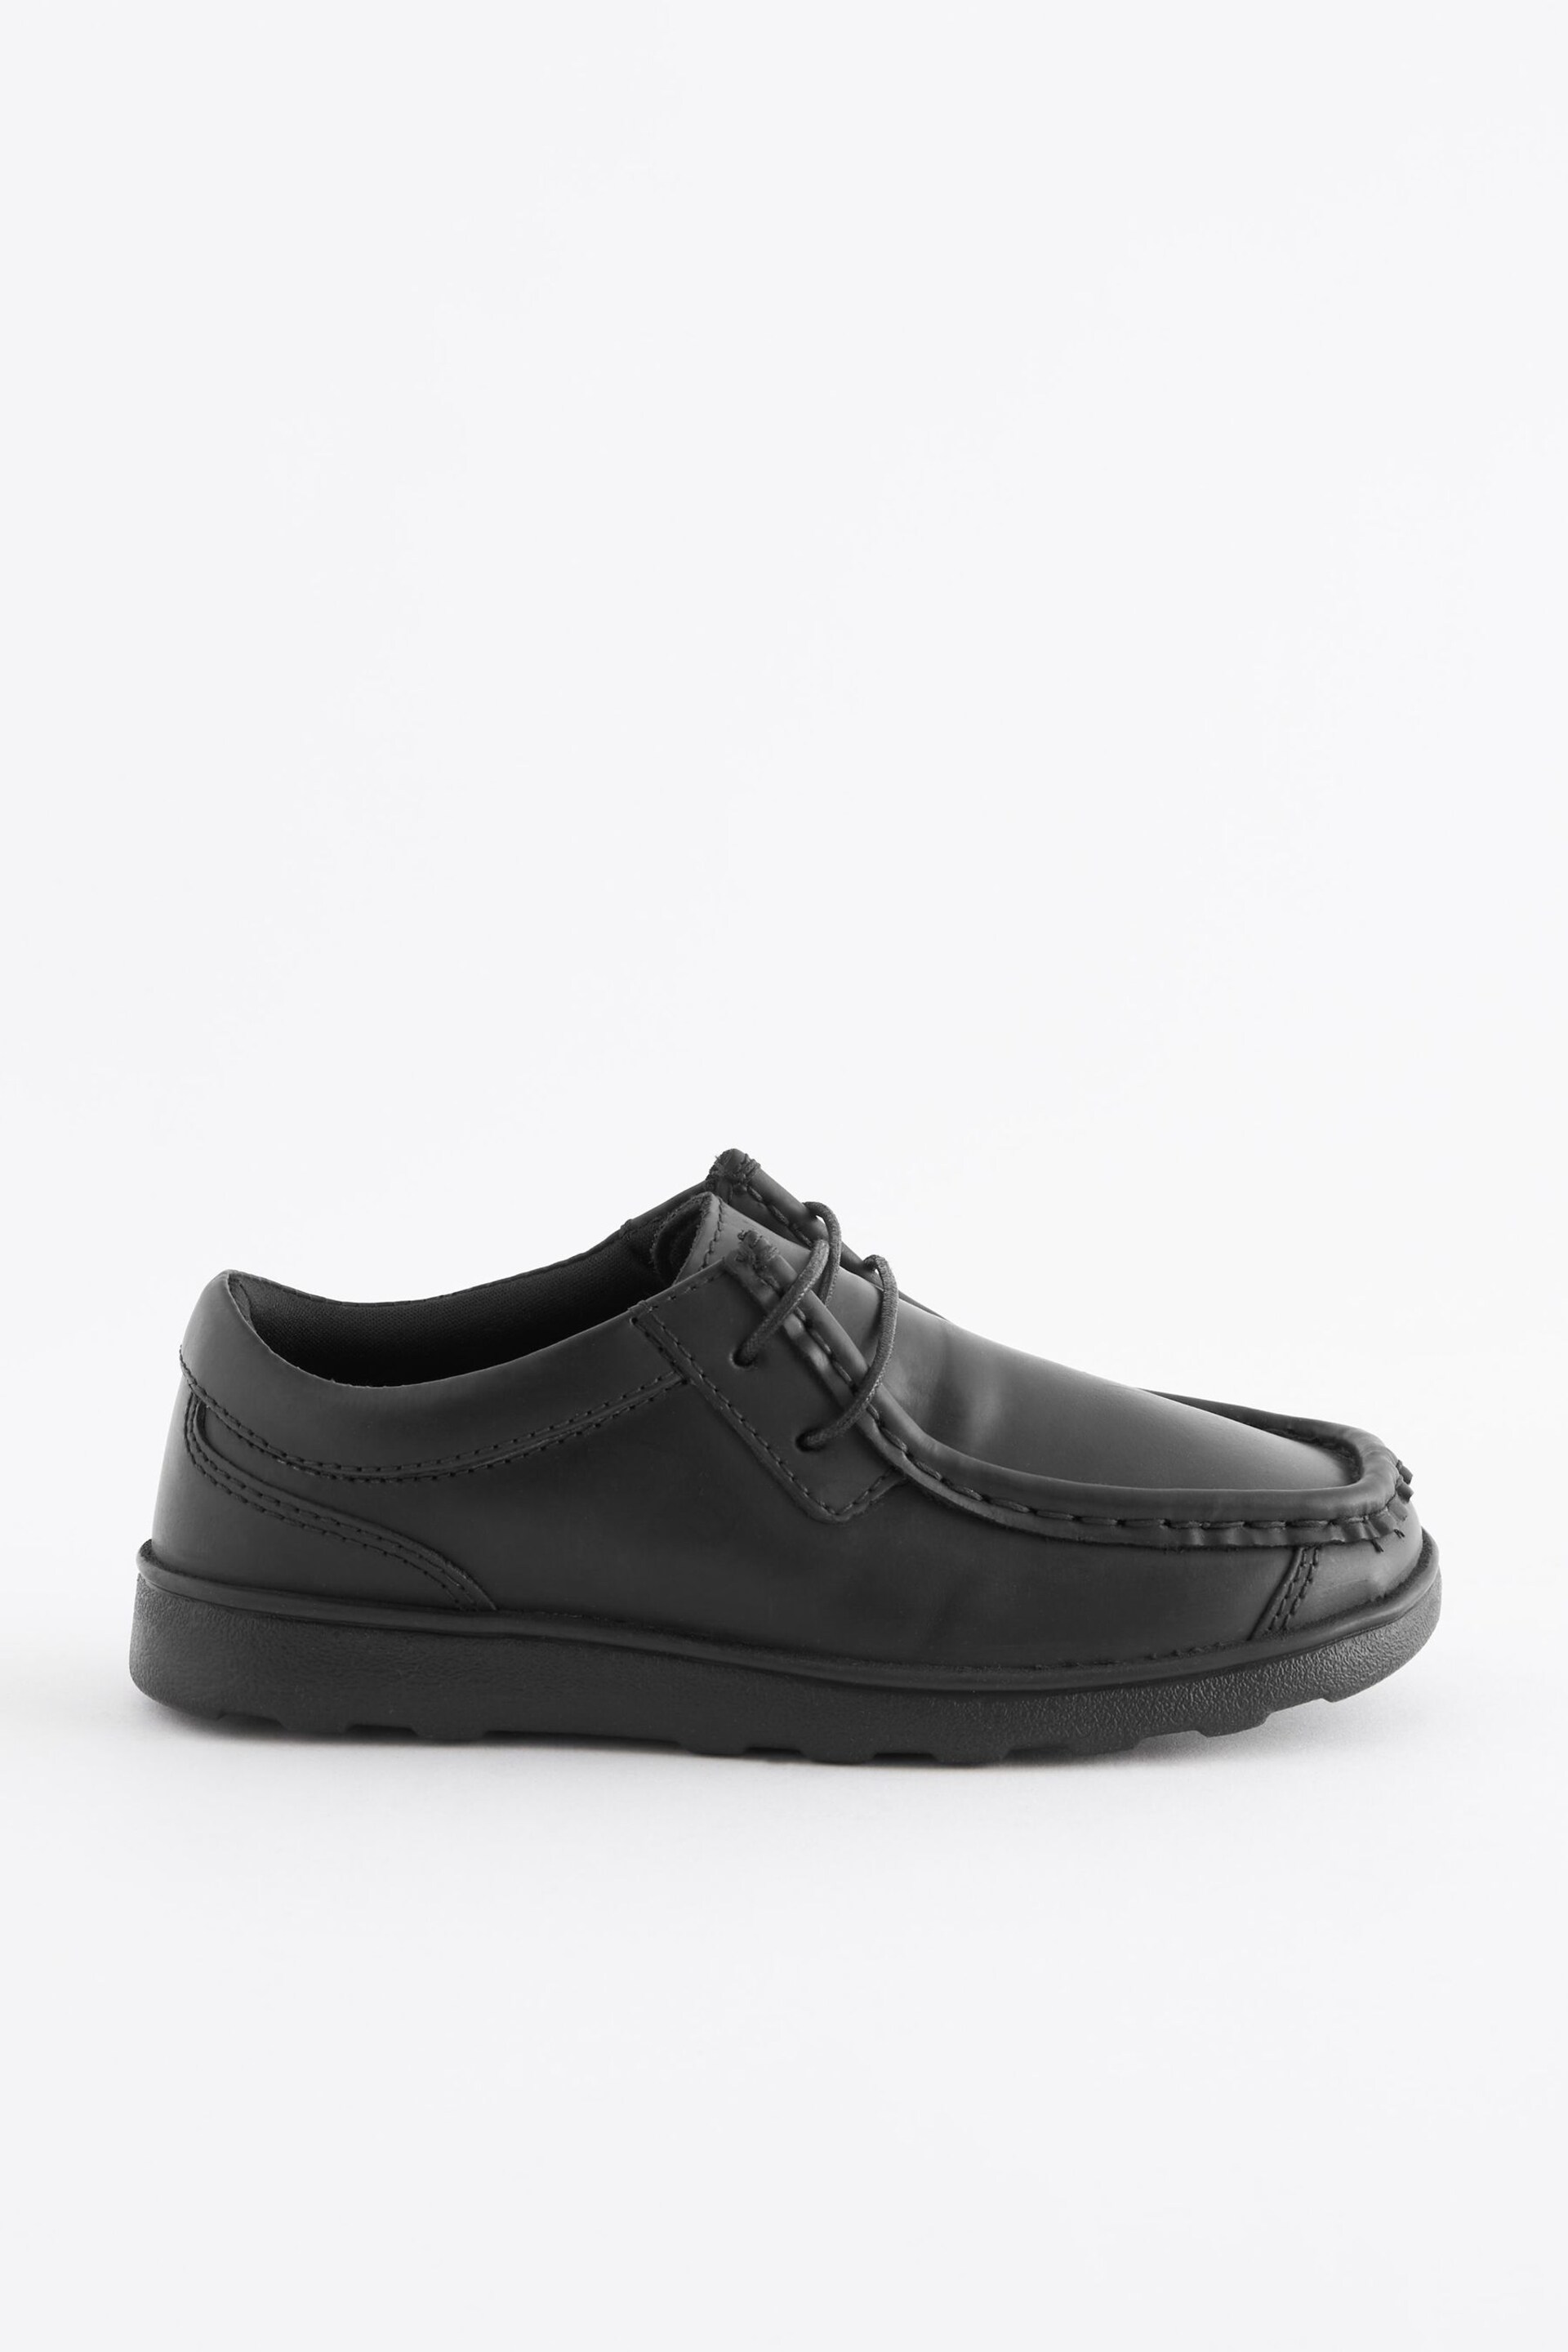 Black School Leather Lace-Up Shoes - Image 2 of 8